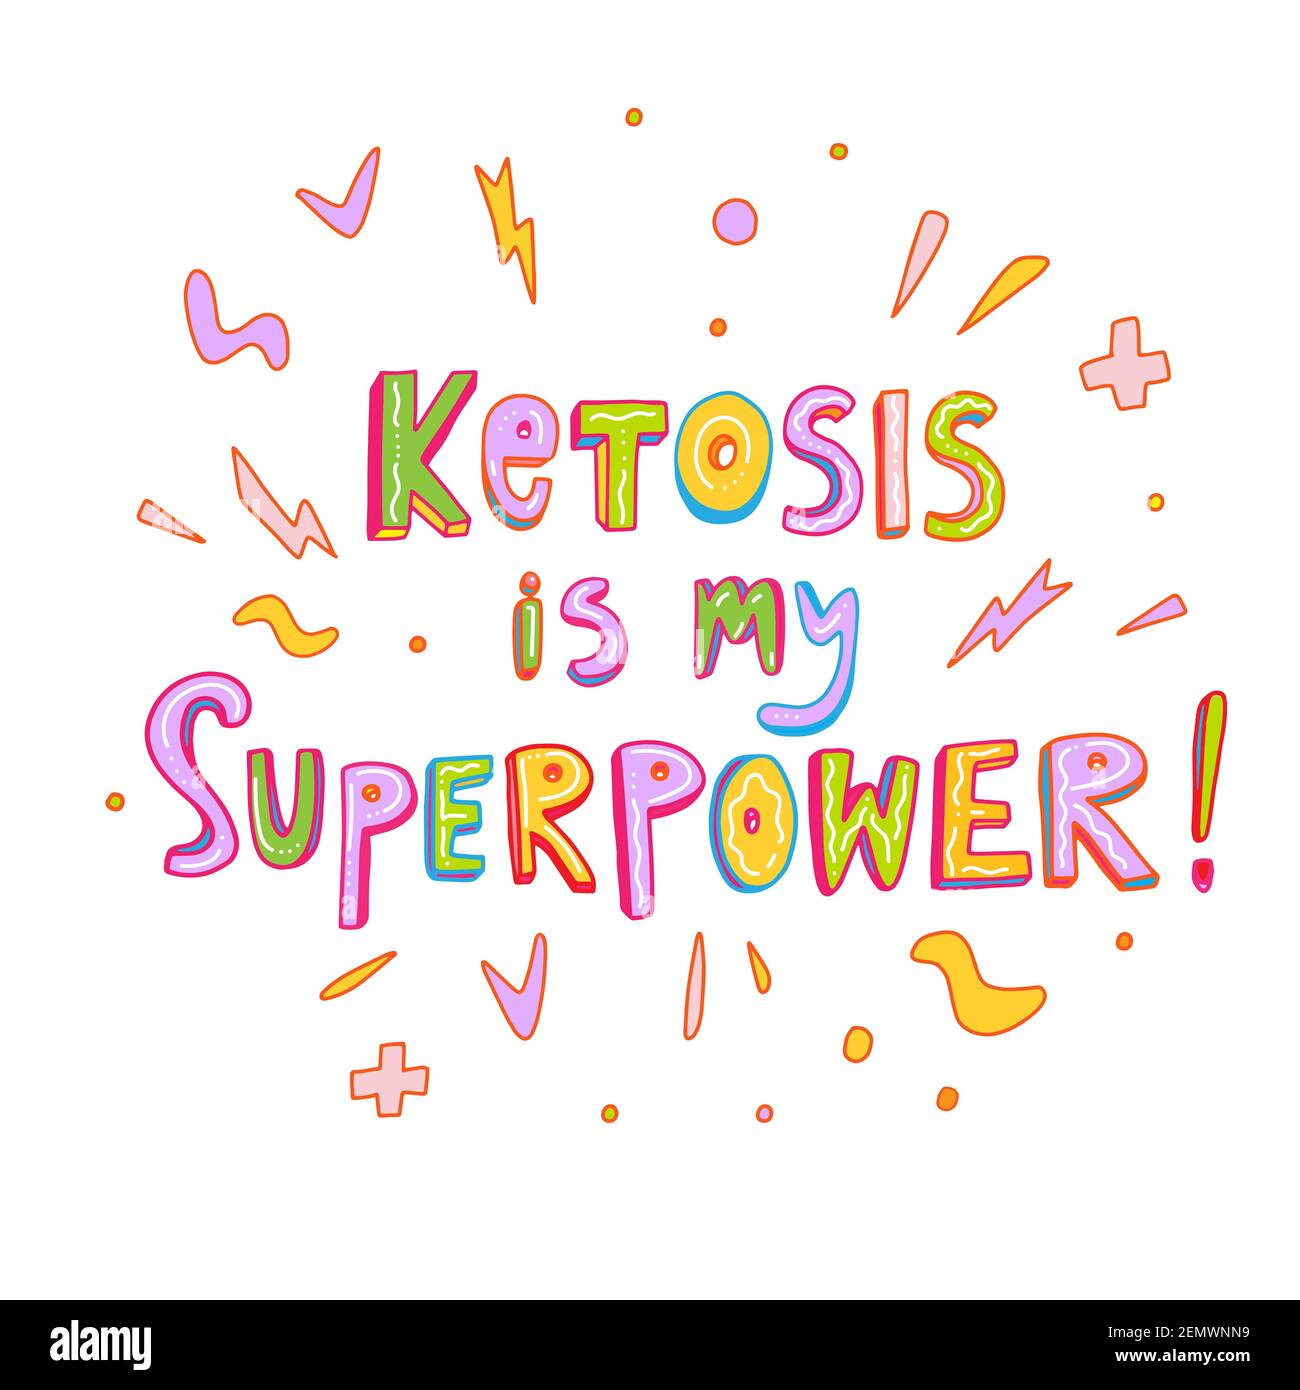 Ketosis is my superpower. Handwritten lettering phrase. Positive motivation keto diet slogan for banner, poster, t-shirt, card design. Vector Stock Vector